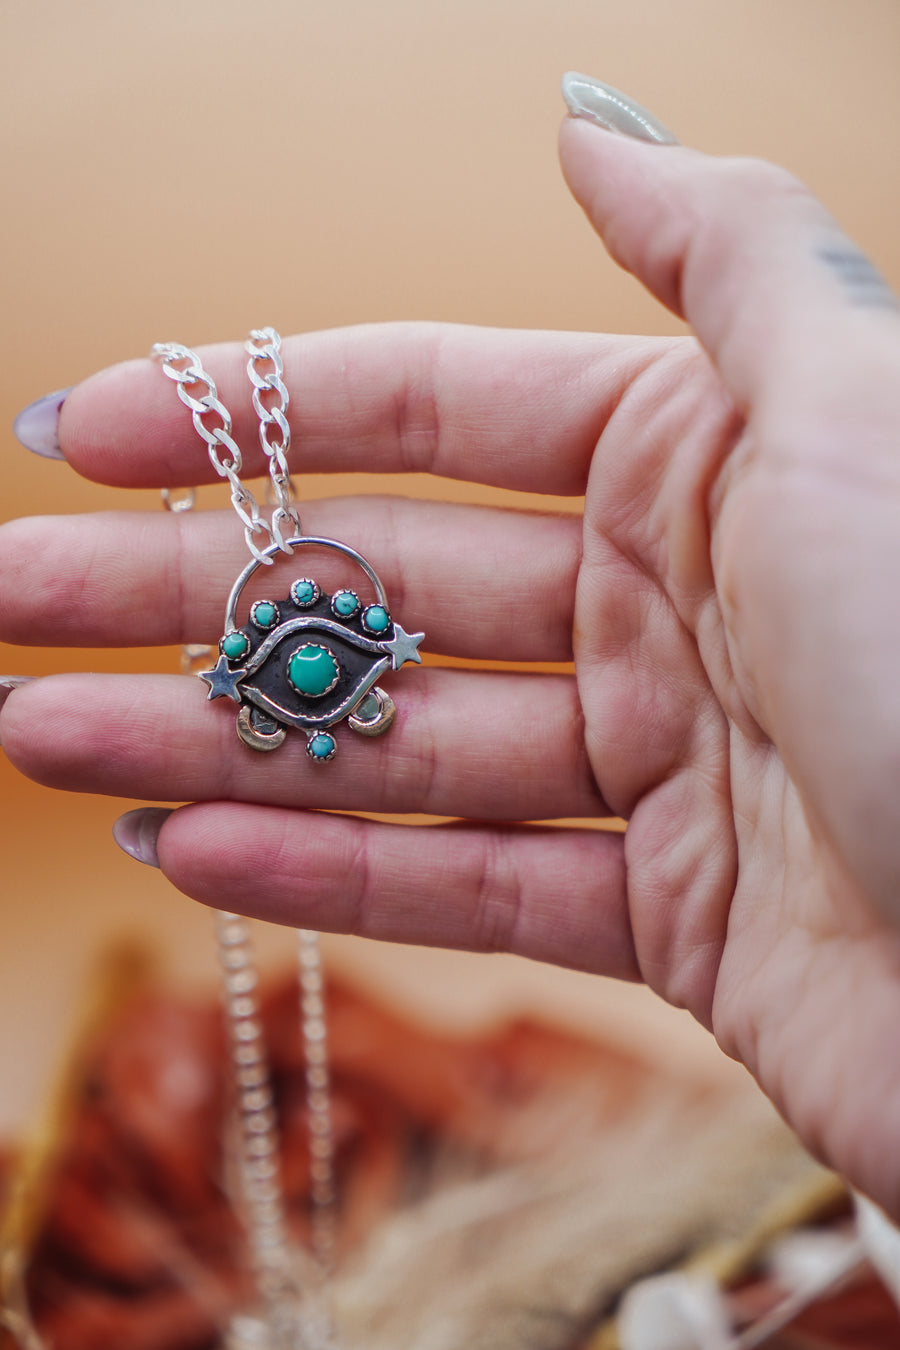 The Magic Eye Necklace in Hubei & Lone Mtn Turquoise